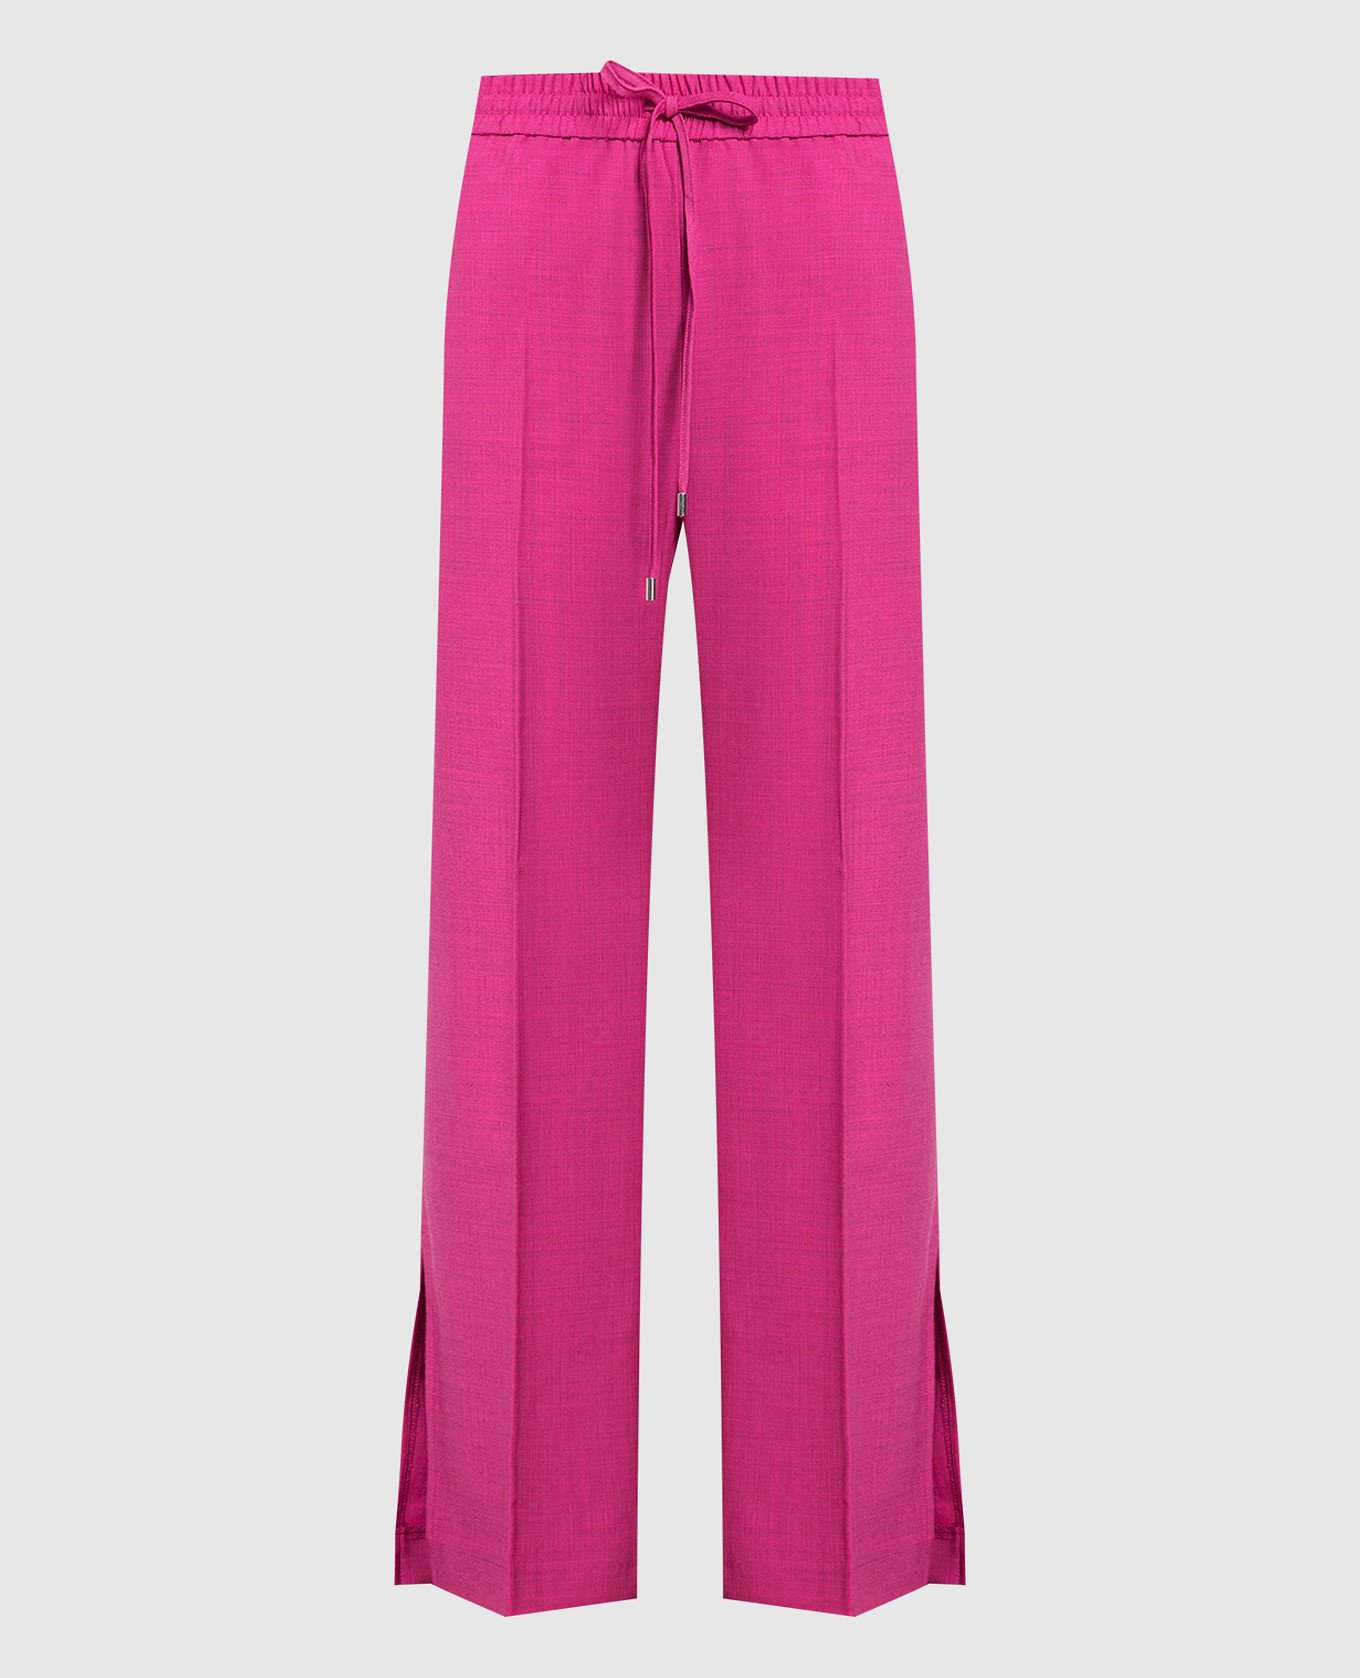 Pink pants with slits